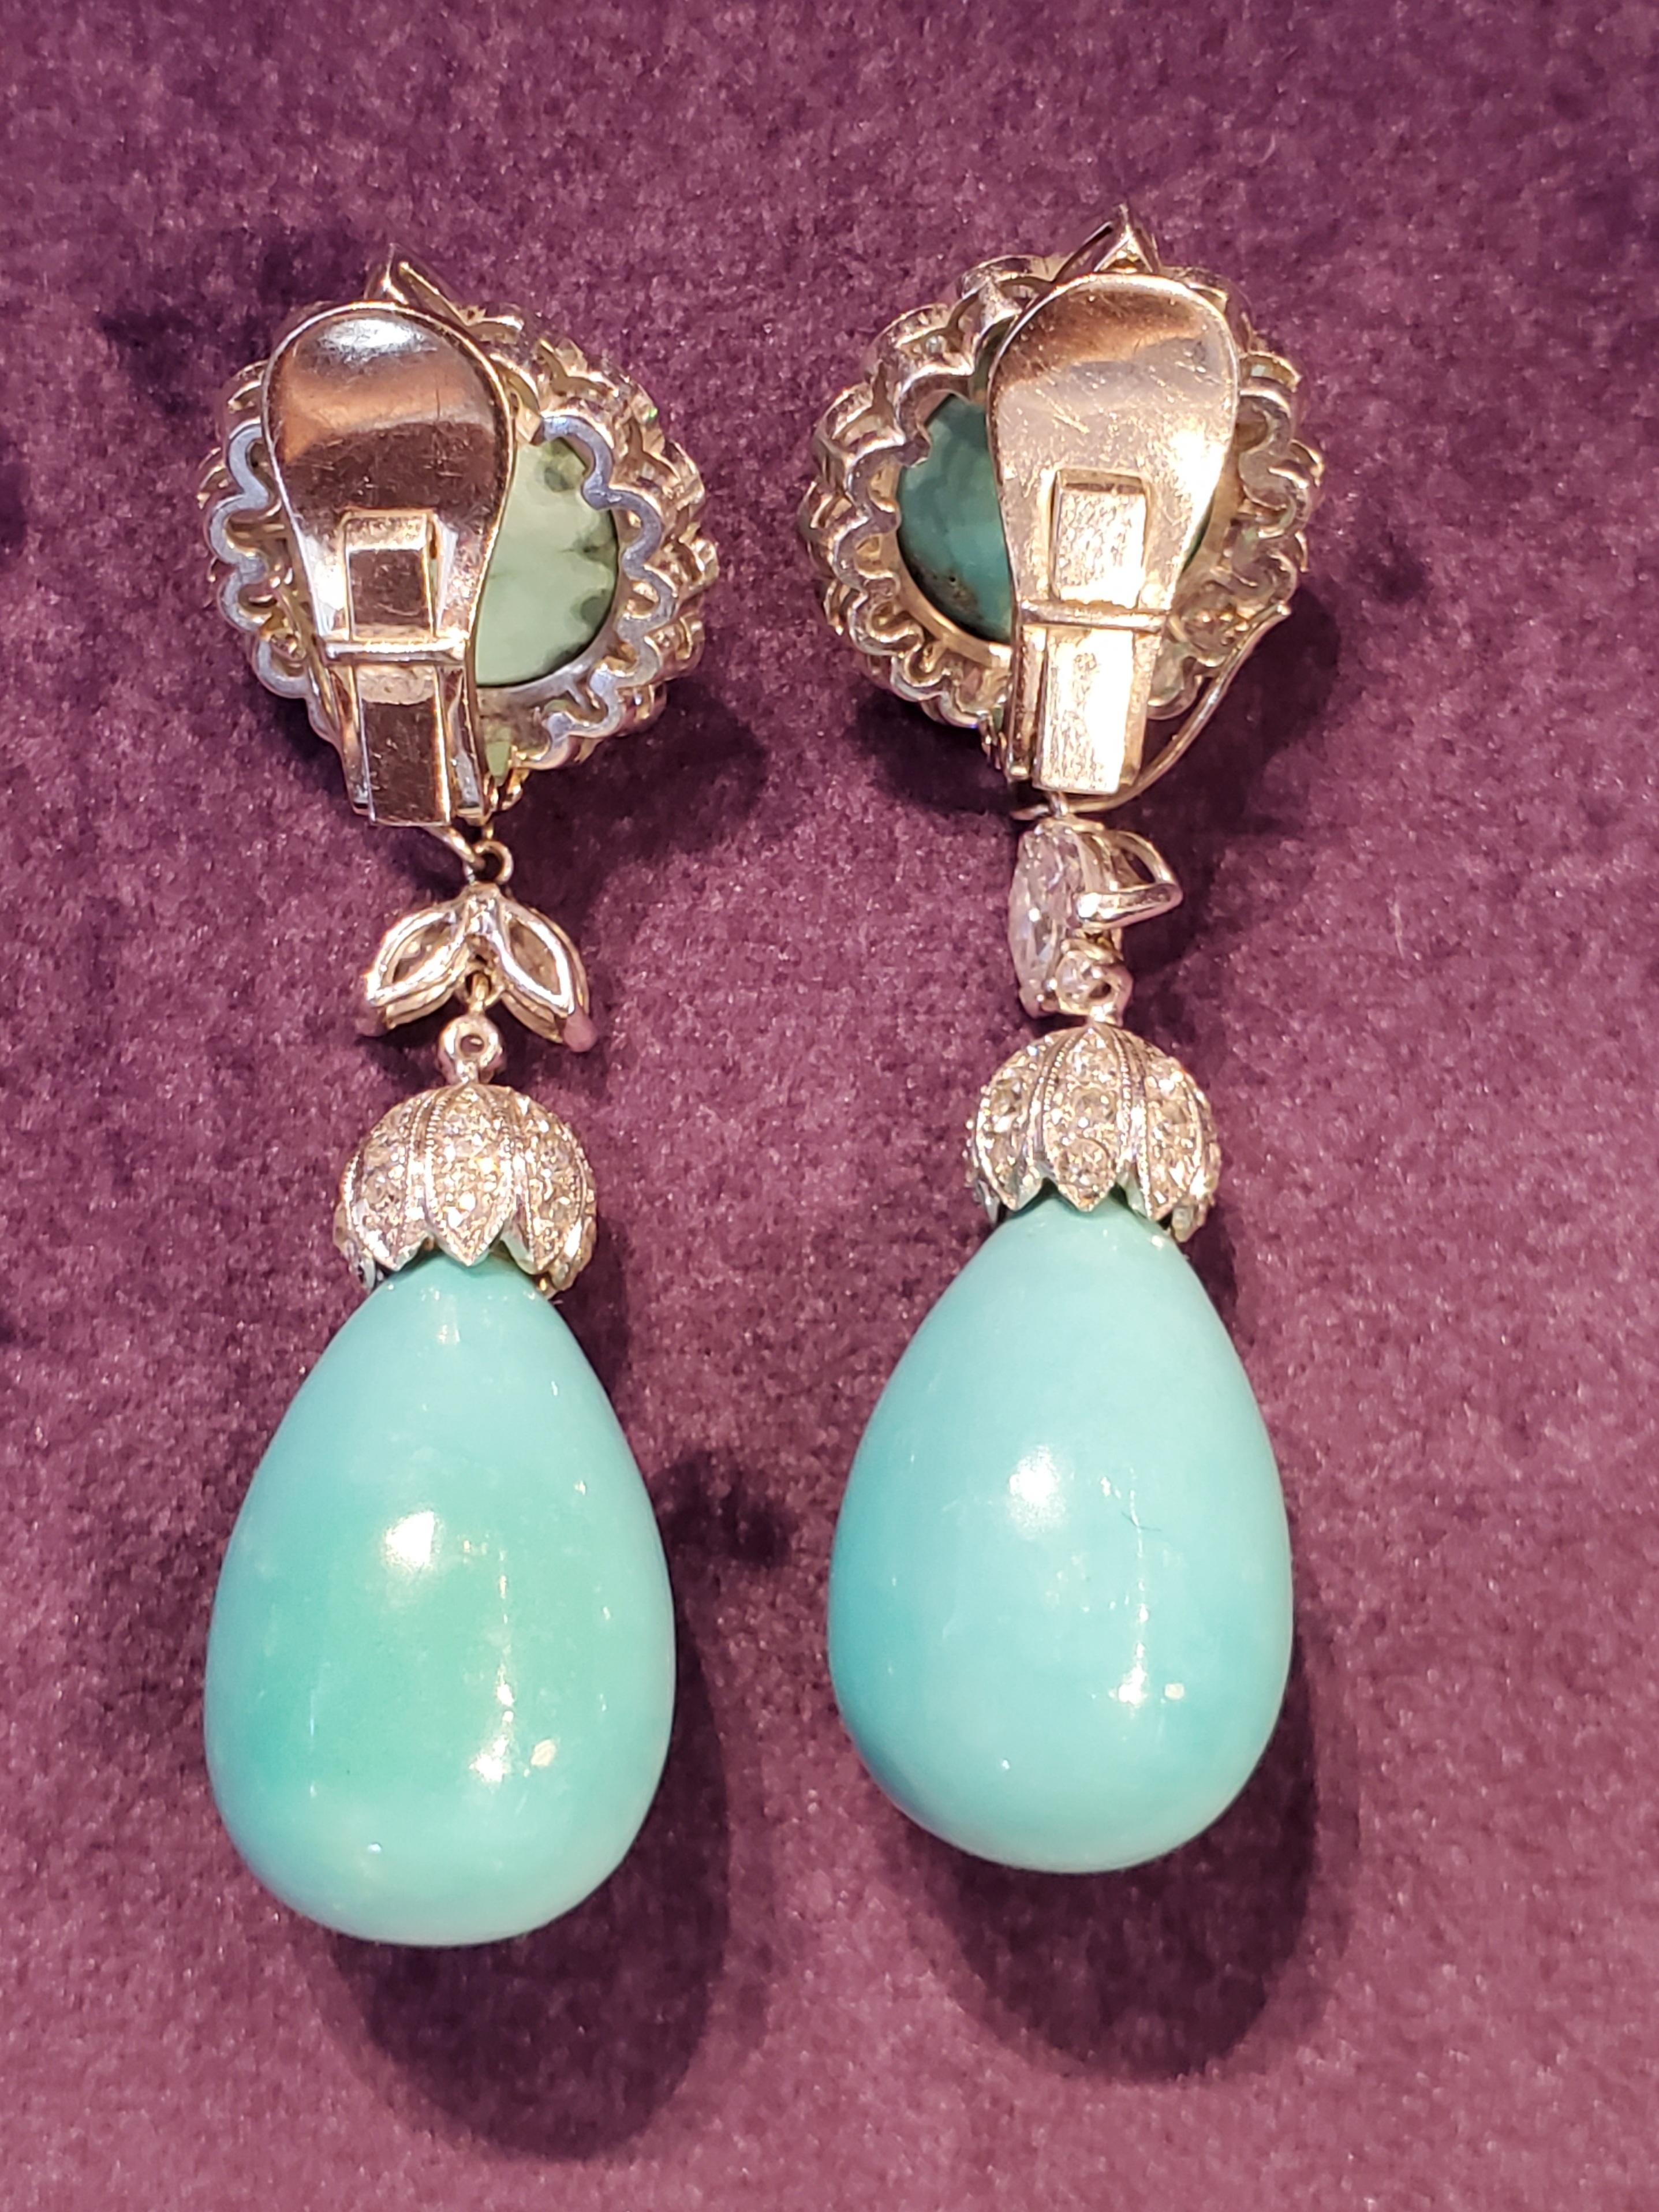 Iconic Van Cleef & Arpels Turquoise & Diamond 'Day and Night' Earrings 4